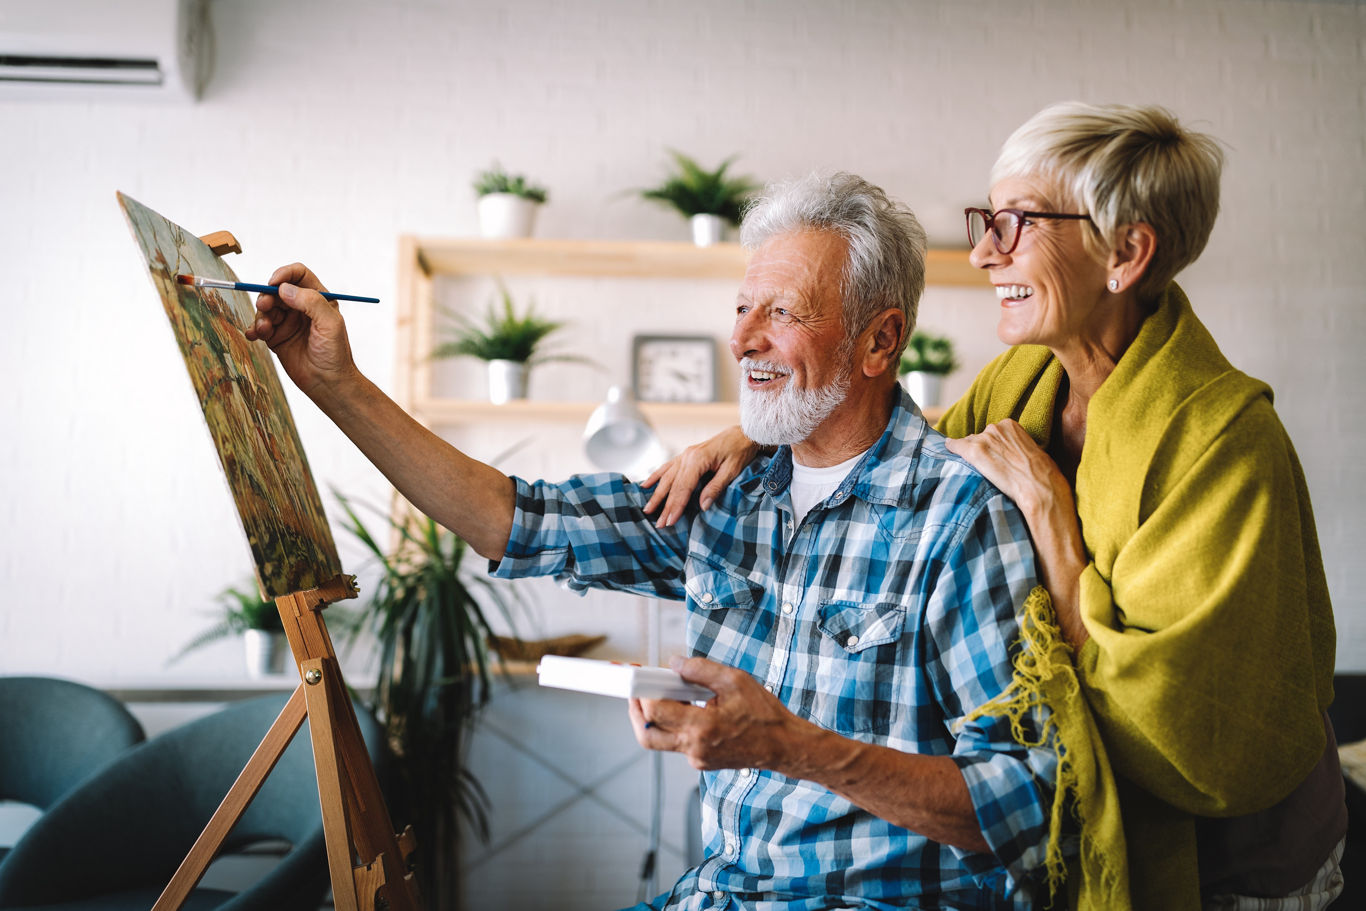 Elderly Couple Painting Picture Together | Blog | Greystar